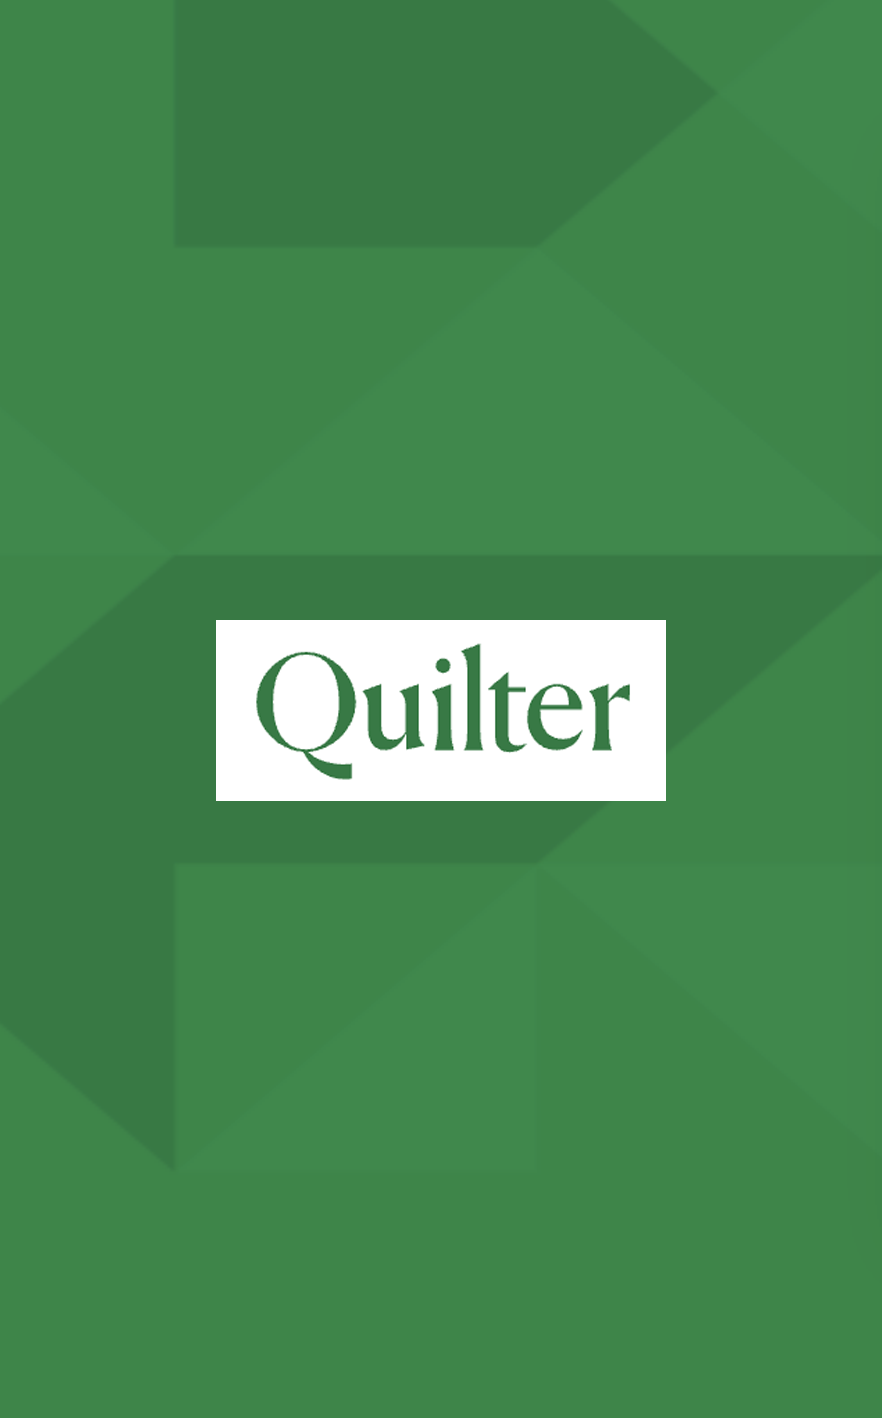 Logo of Quilter in front of a green backdrop. FundApps works treemendously with Wealth Management Companies. Green energy all the way! 